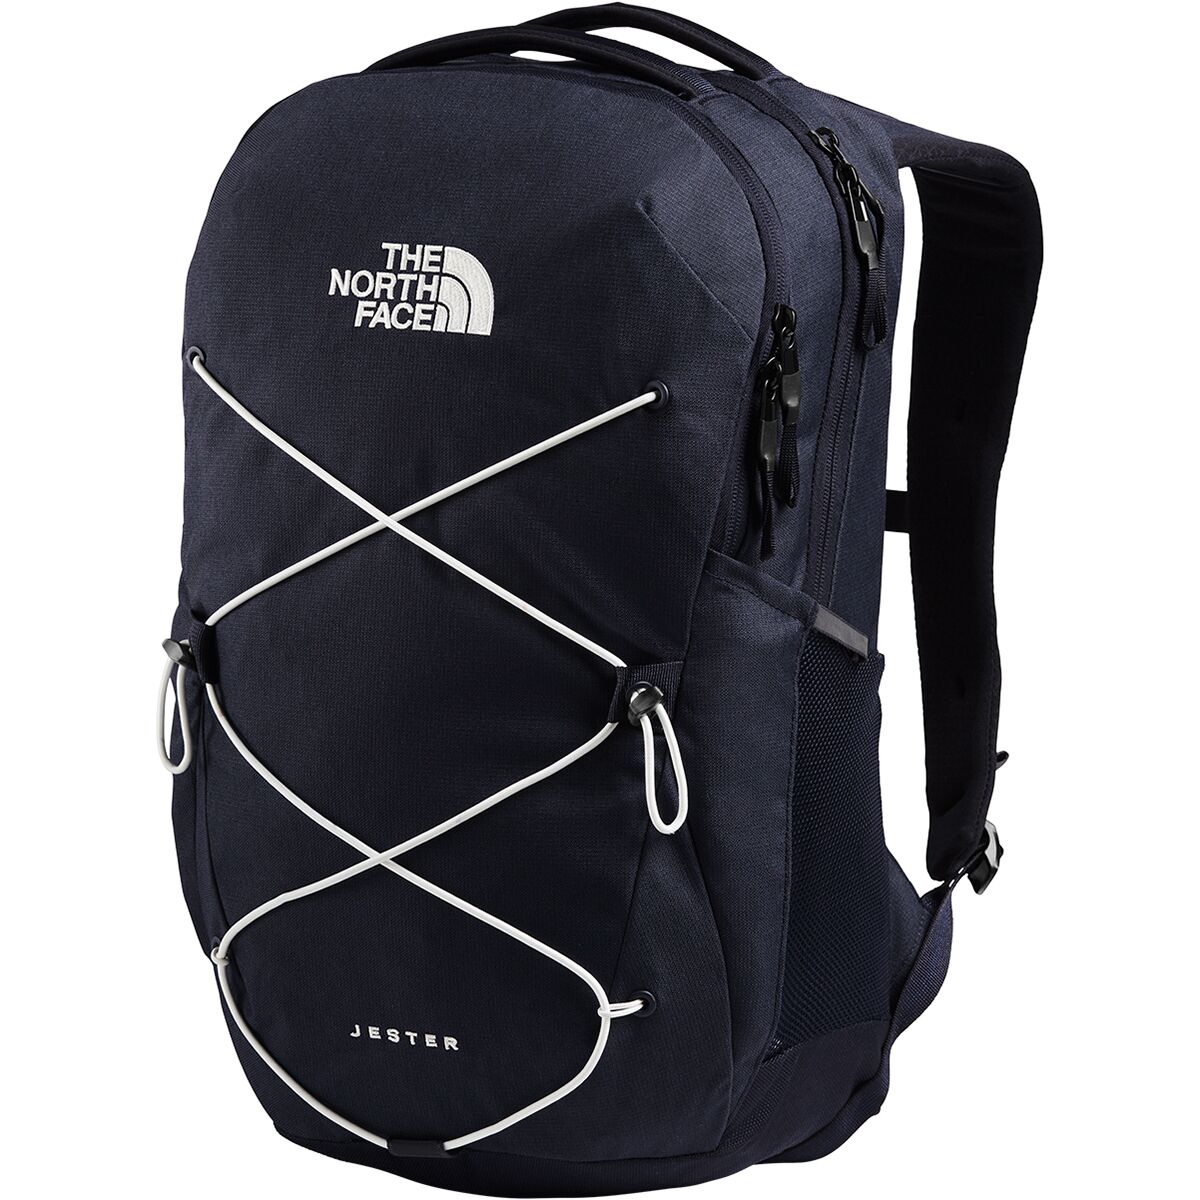 The North Face Backpack Jester Sale Flash Sales, 58% OFF |  www.ingeniovirtual.com